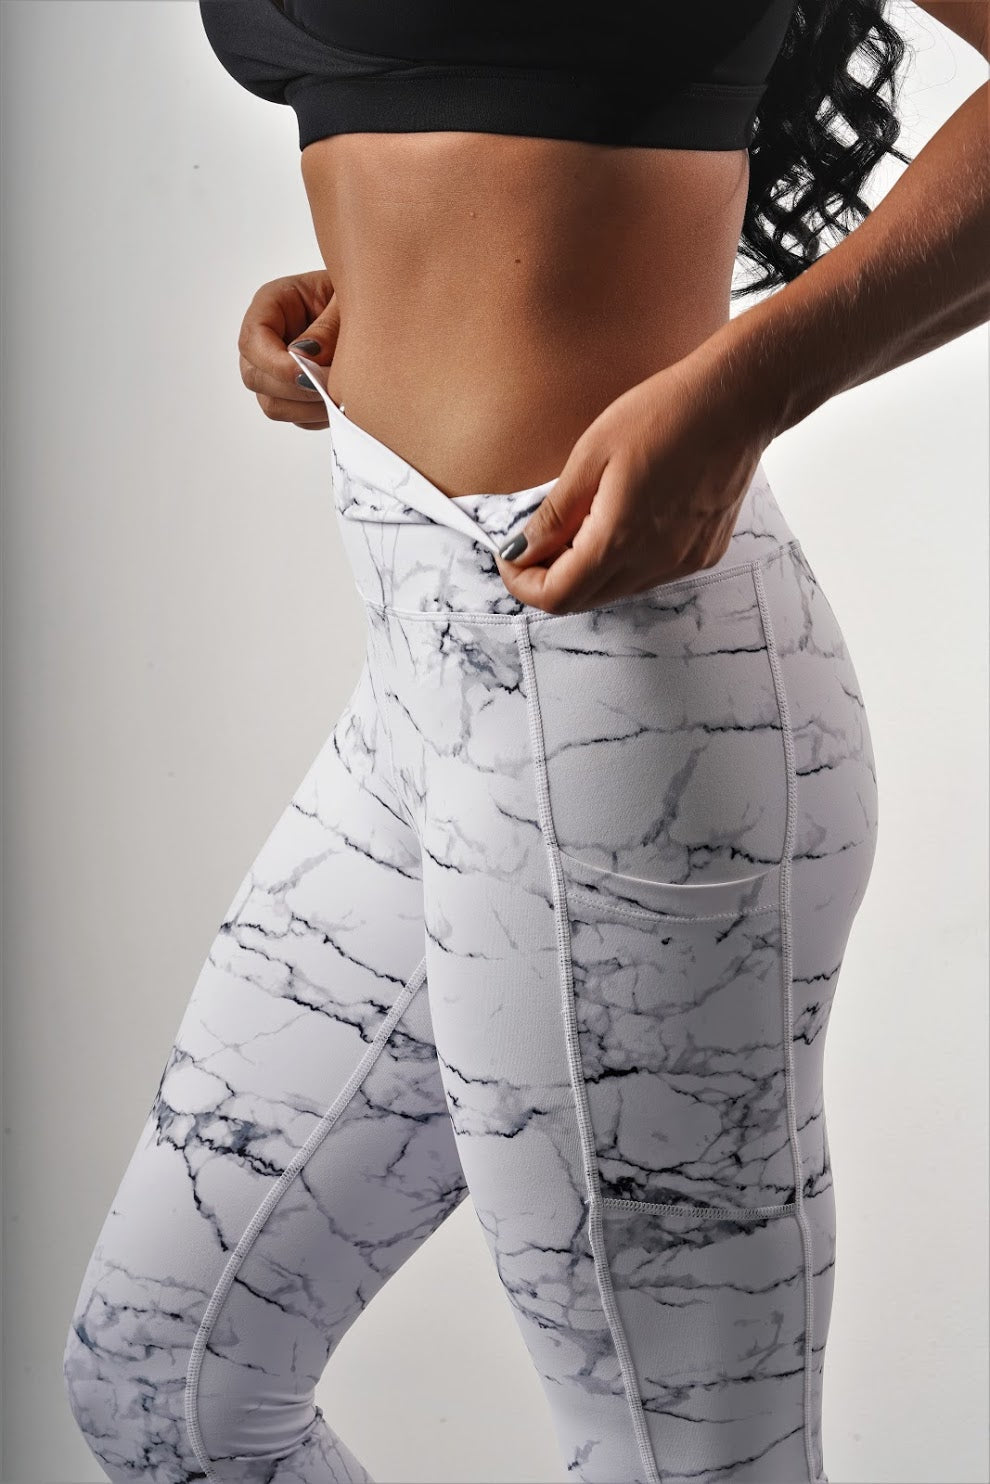 OFF THE POLE Iconic Leggings - White Marble *SIZE XL ONLY*